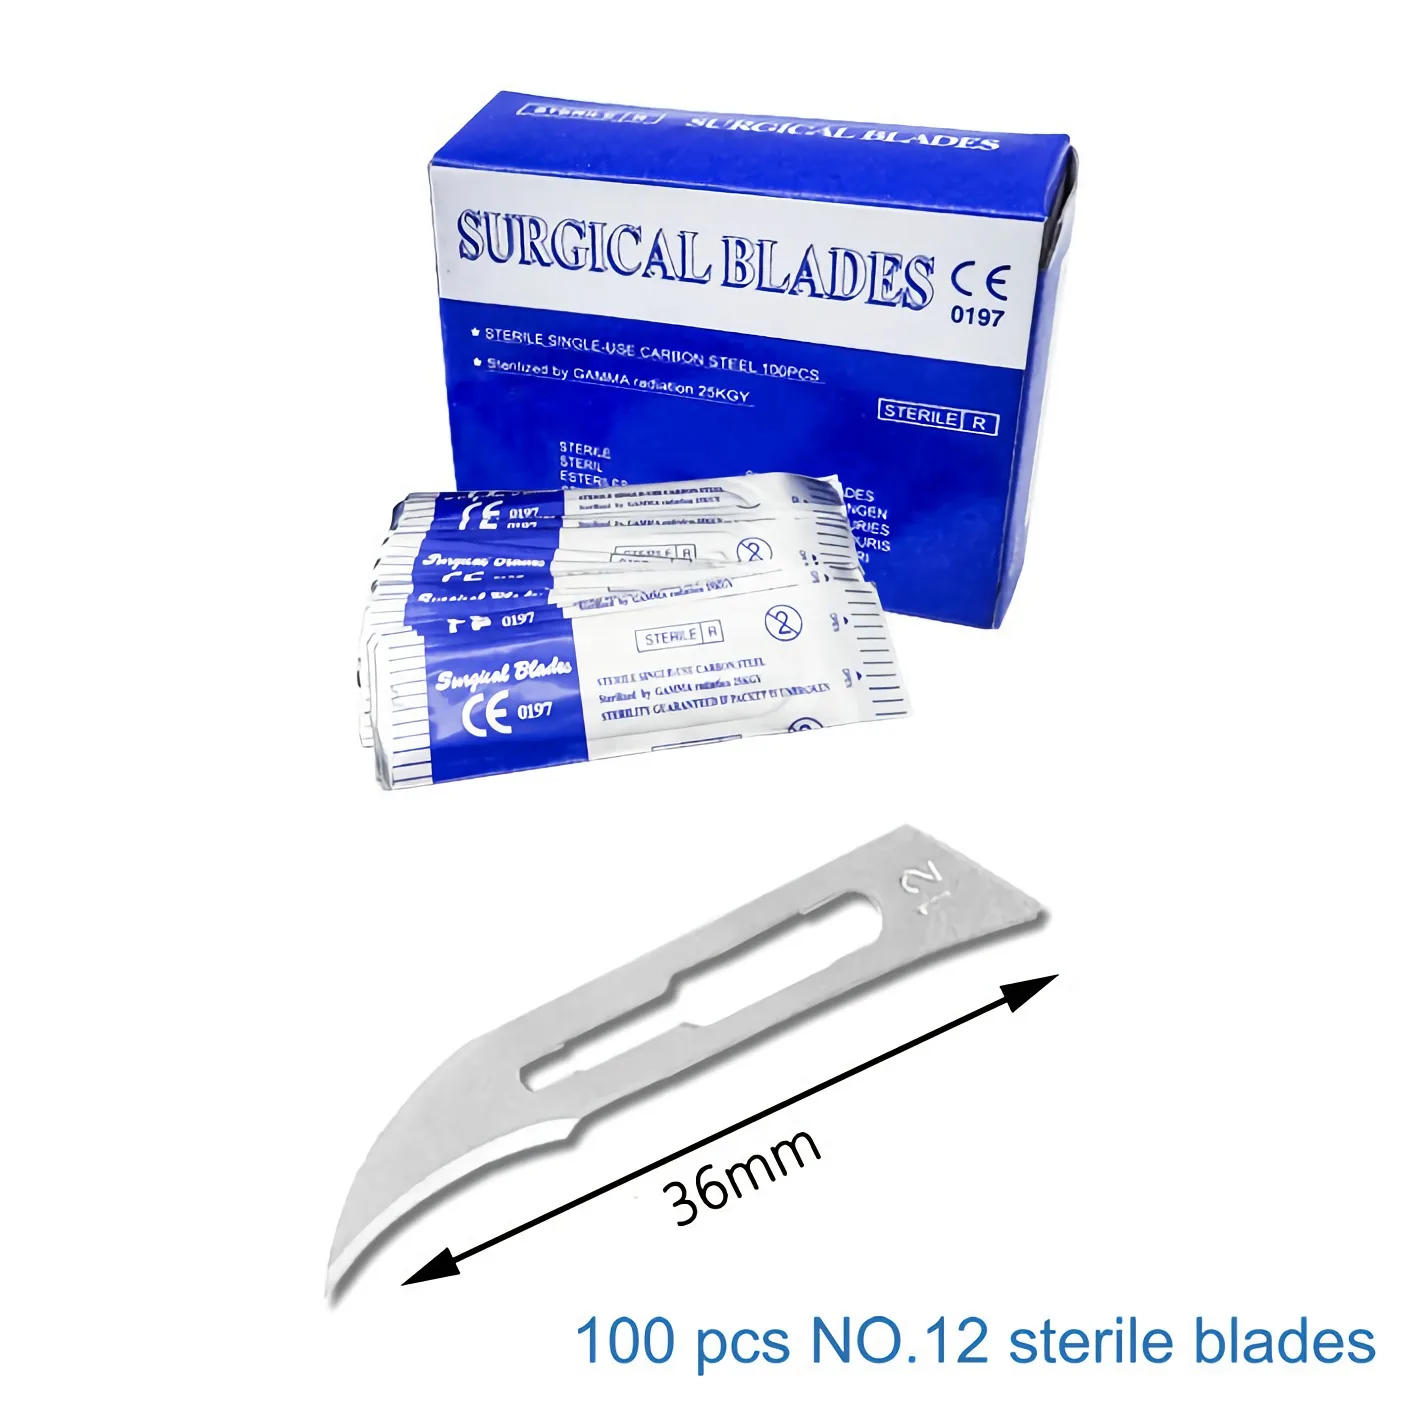 shoulder plane 100pcs Sterile #10/11/23/15 Medical Surgical Blades for Eyebrow,Dental,Dissection, Podiatry, Grooming, Acne Removal,Laboratory hand planer lowes Hand Tools